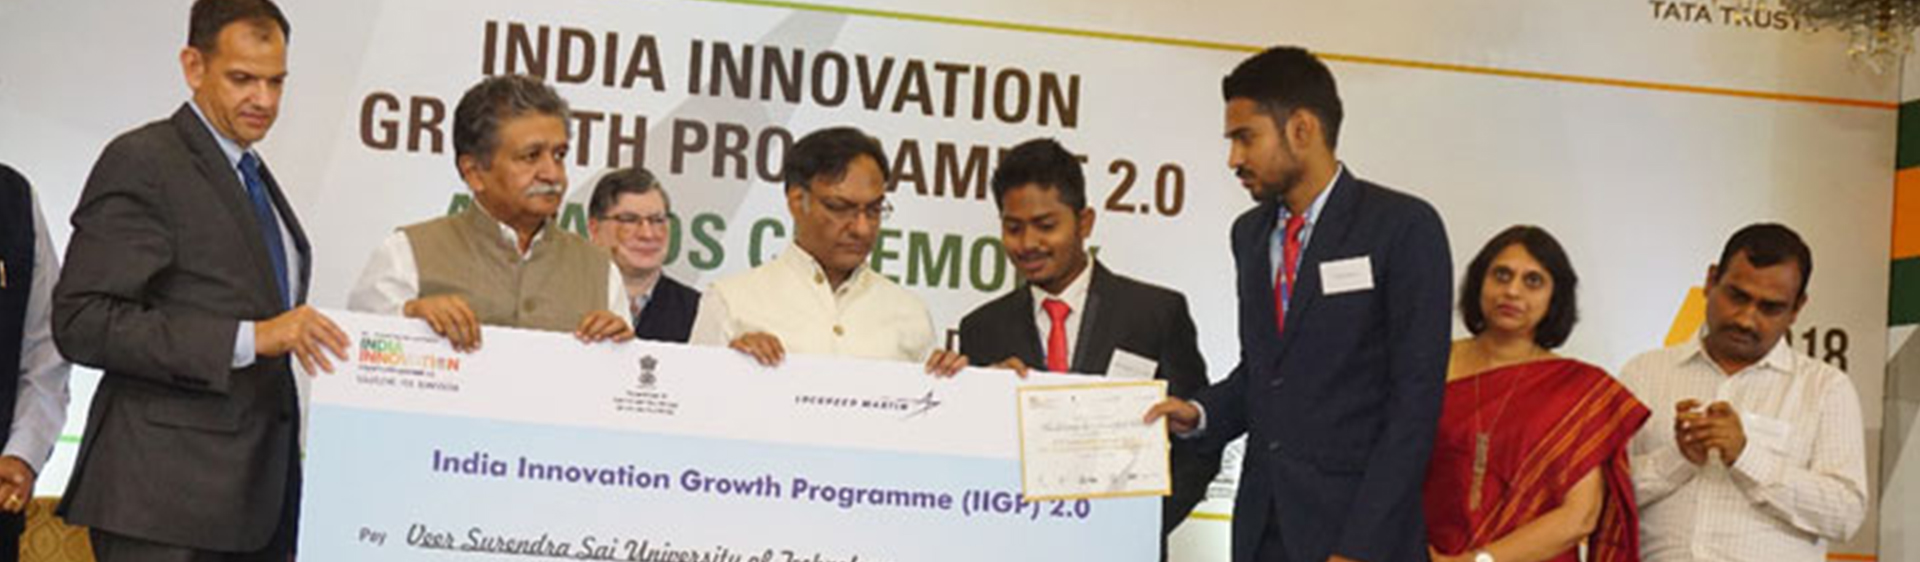 winners of University Challenge, India Innovation Growth Programme 2.0, by DST, Government of India,  2nd August 2018 in New Delhi